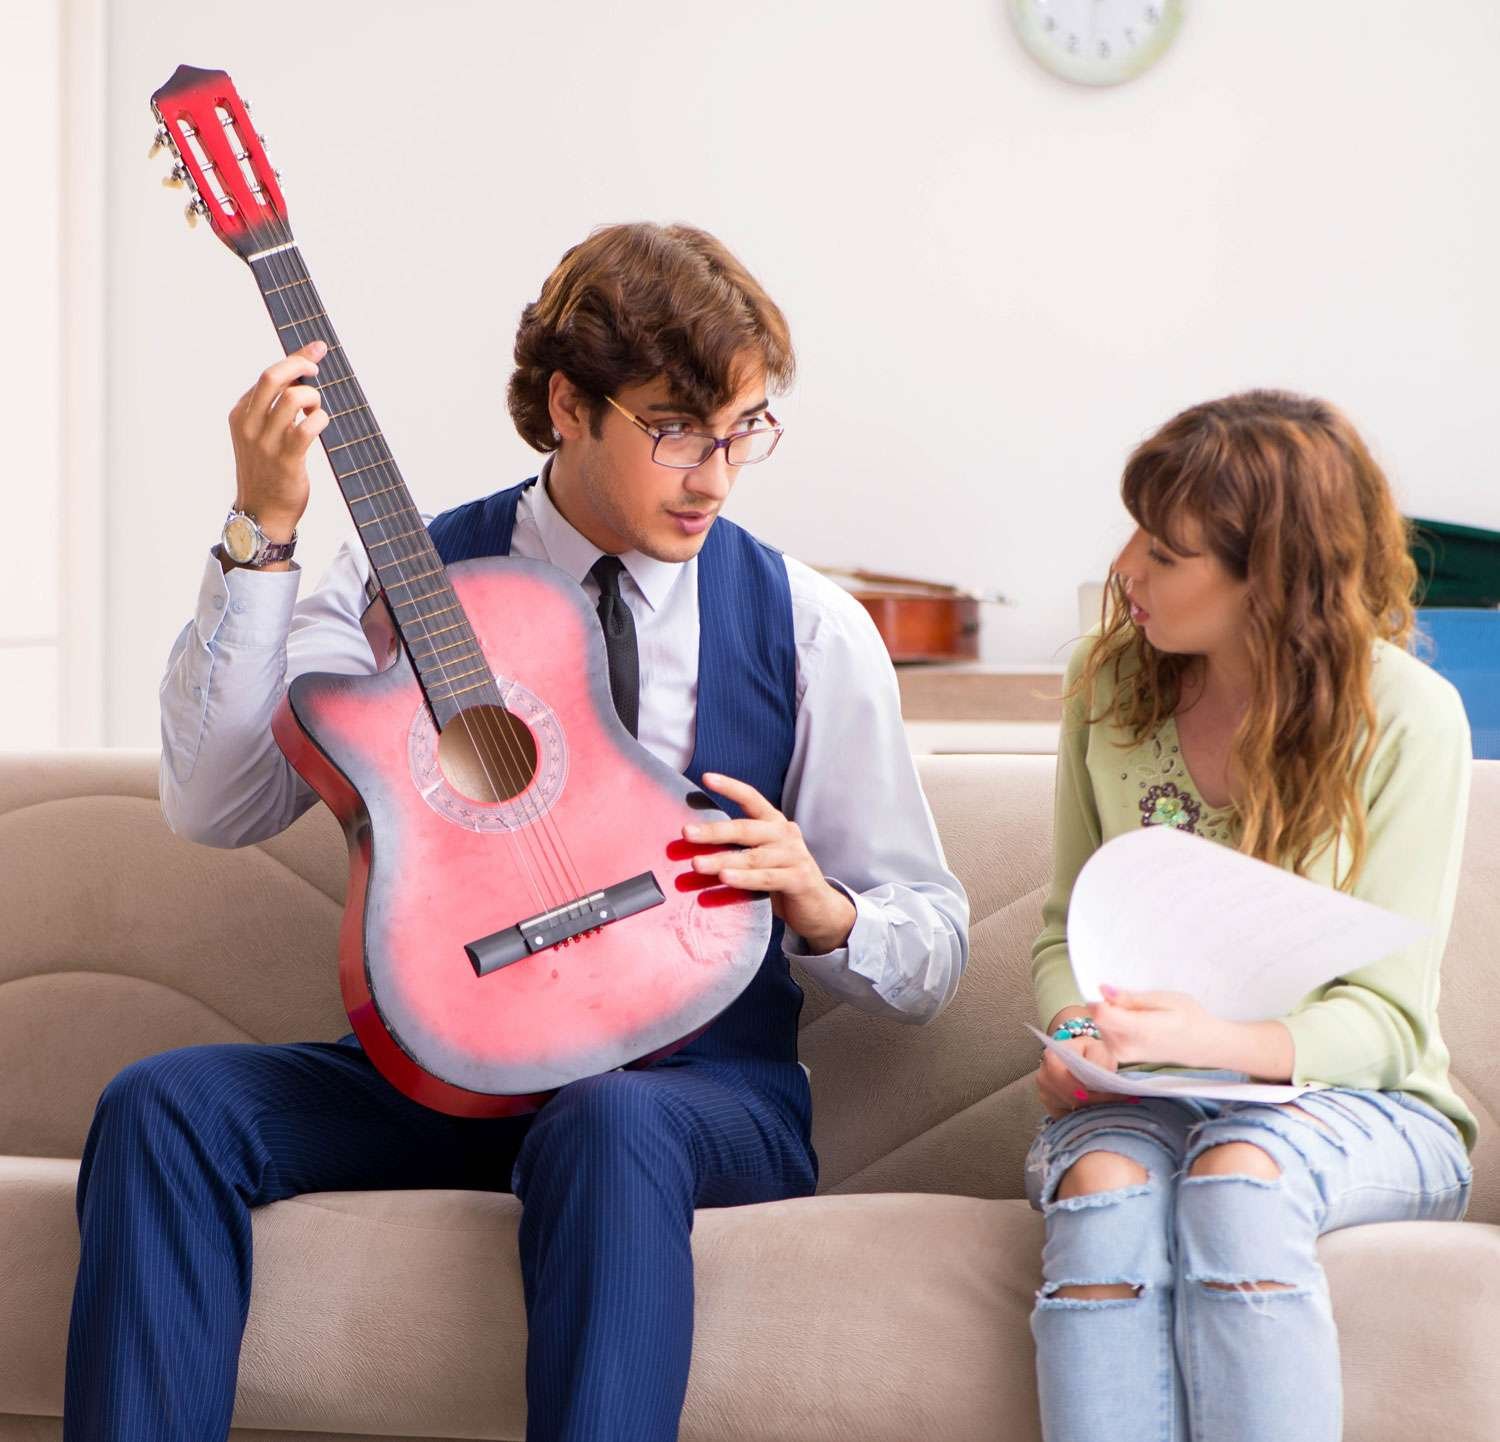 guitar instructor explaining to his female student